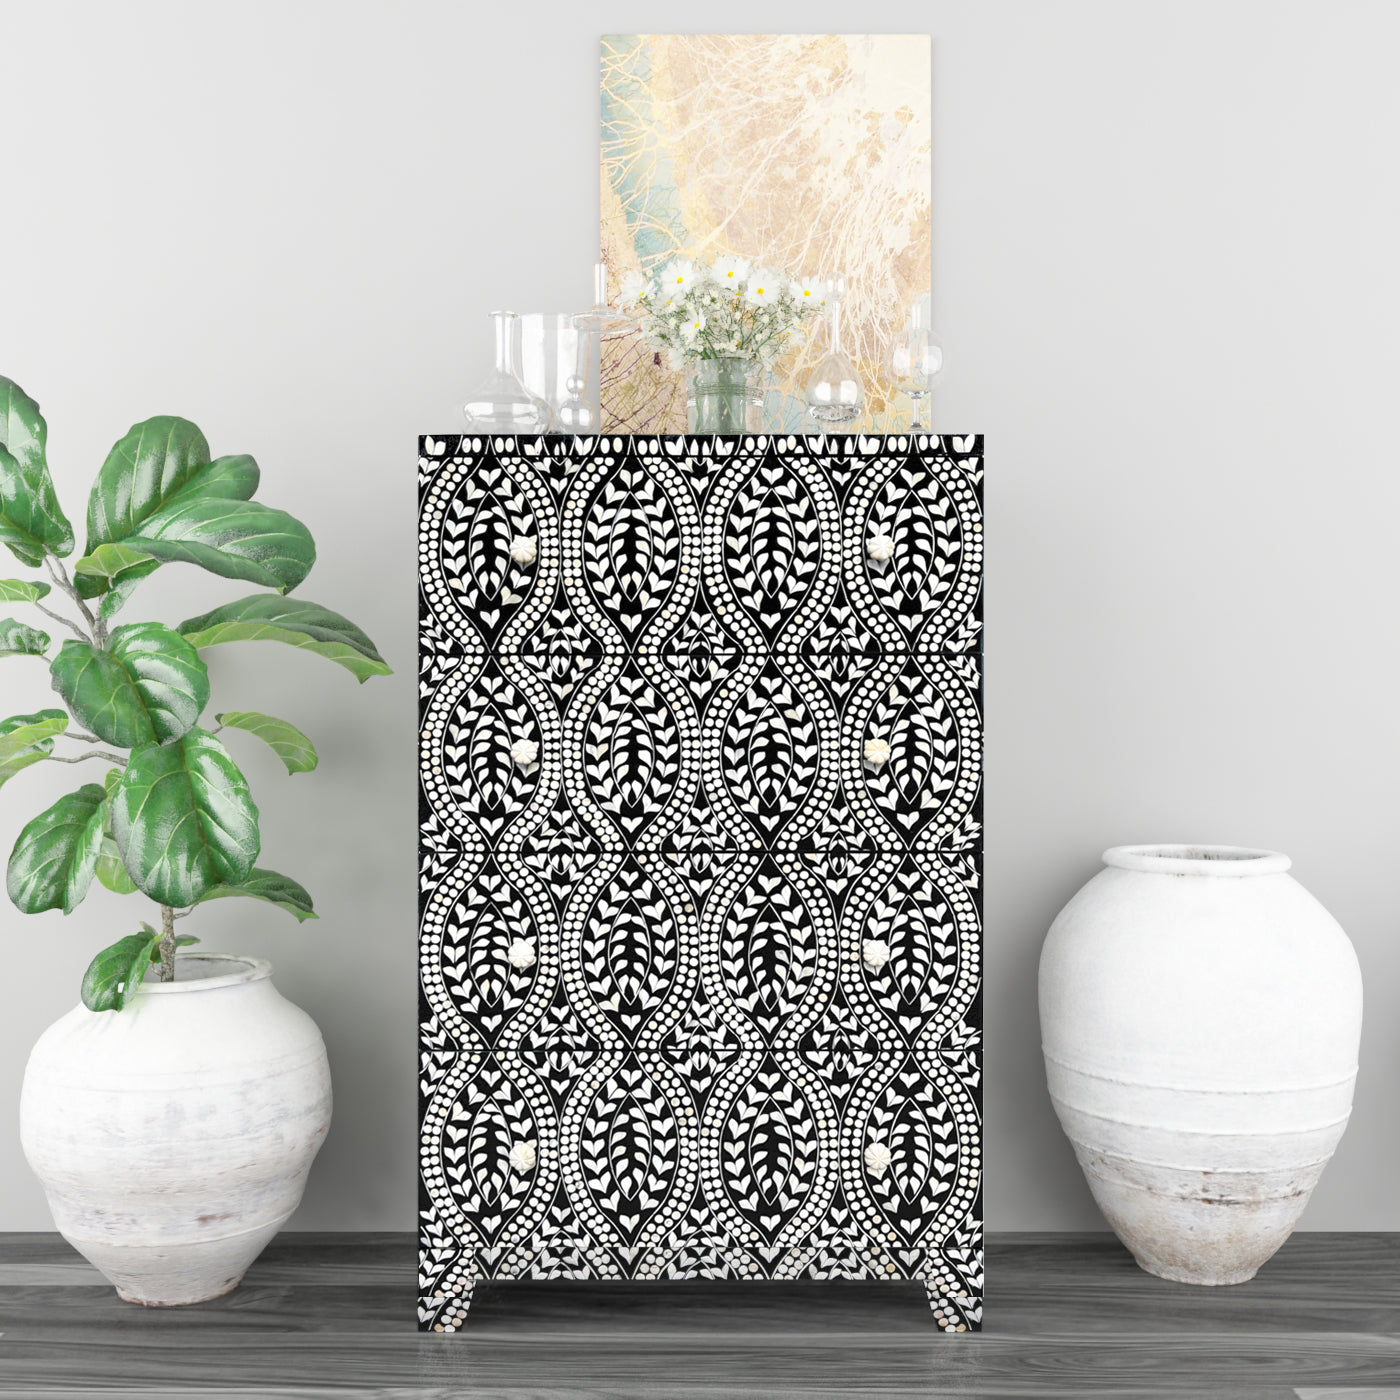 Kotor Chest of Drawers - Black & White Bone Inlay - Tabeer Homes